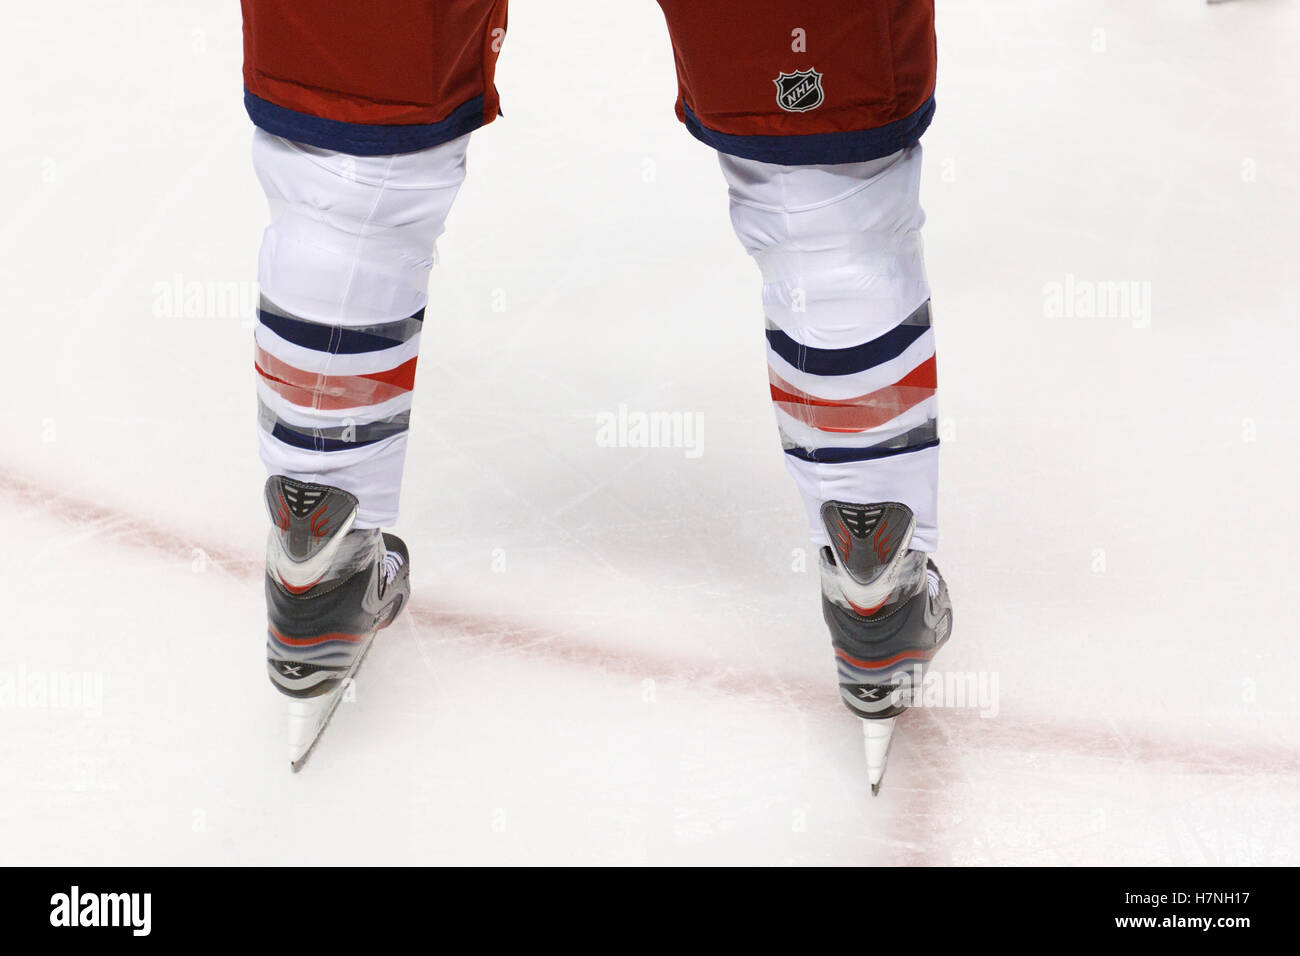 Jan 31, 2012; San Jose, CA, USA; Detailed view of the skates of Columbus Blue Jackets right wing Rick Nash (61) before a face off against the San Jose Sharks during the first period at HP Pavilion. San Jose defeated Columbus 6-0. Stock Photo